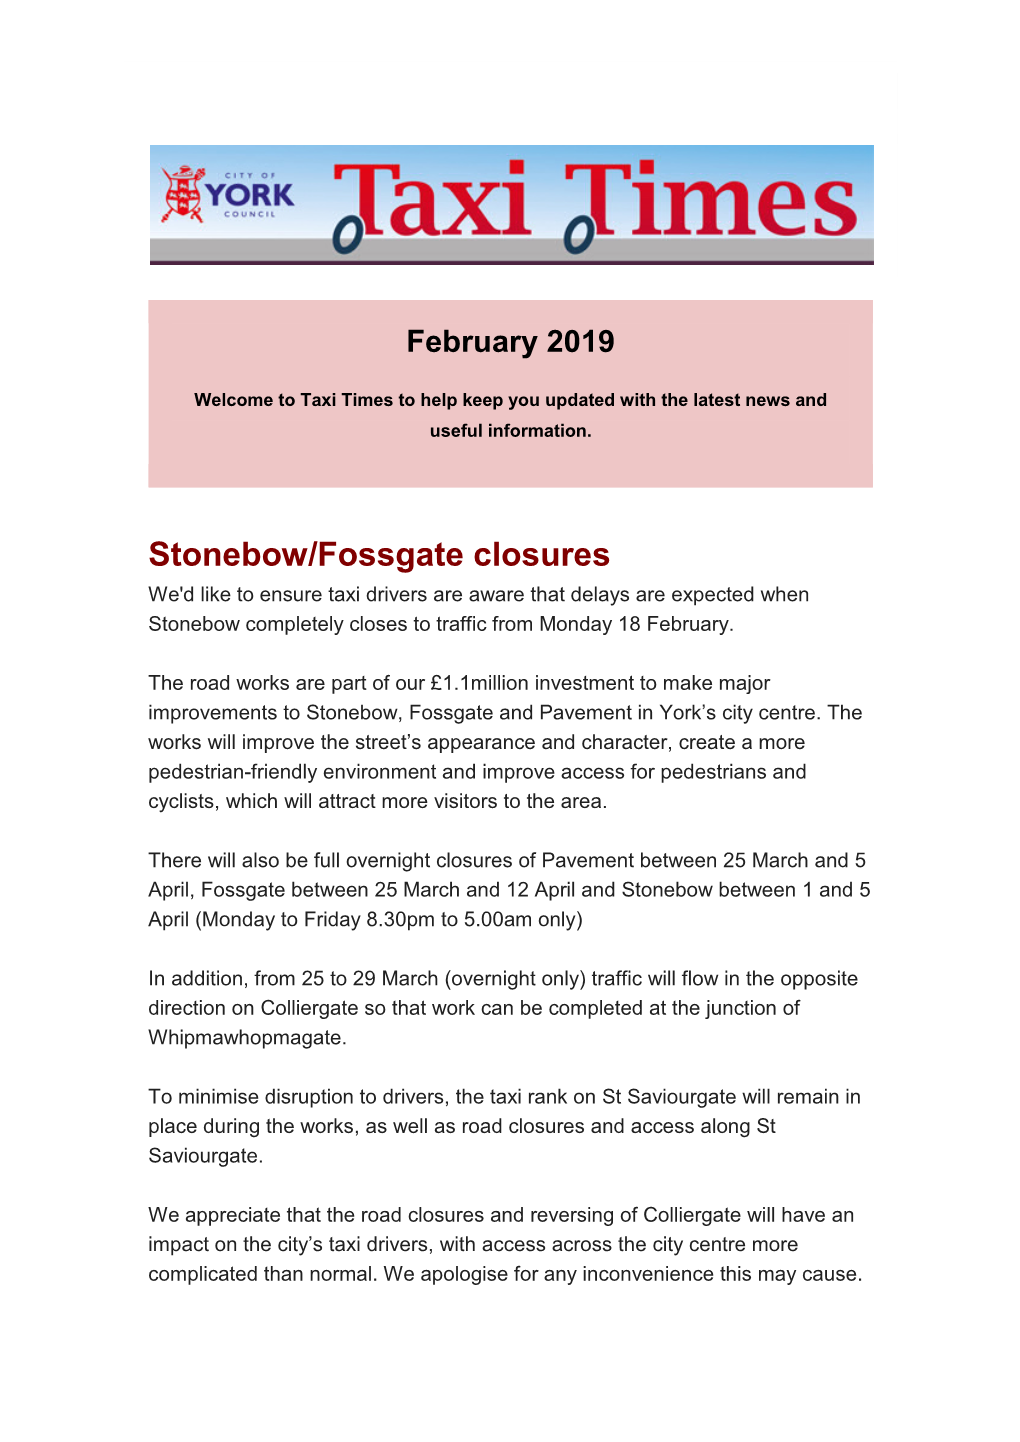 Stonebow/Fossgate Closures We'd Like to Ensure Taxi Drivers Are Aware That Delays Are Expected When Stonebow Completely Closes to Traffic from Monday 18 February